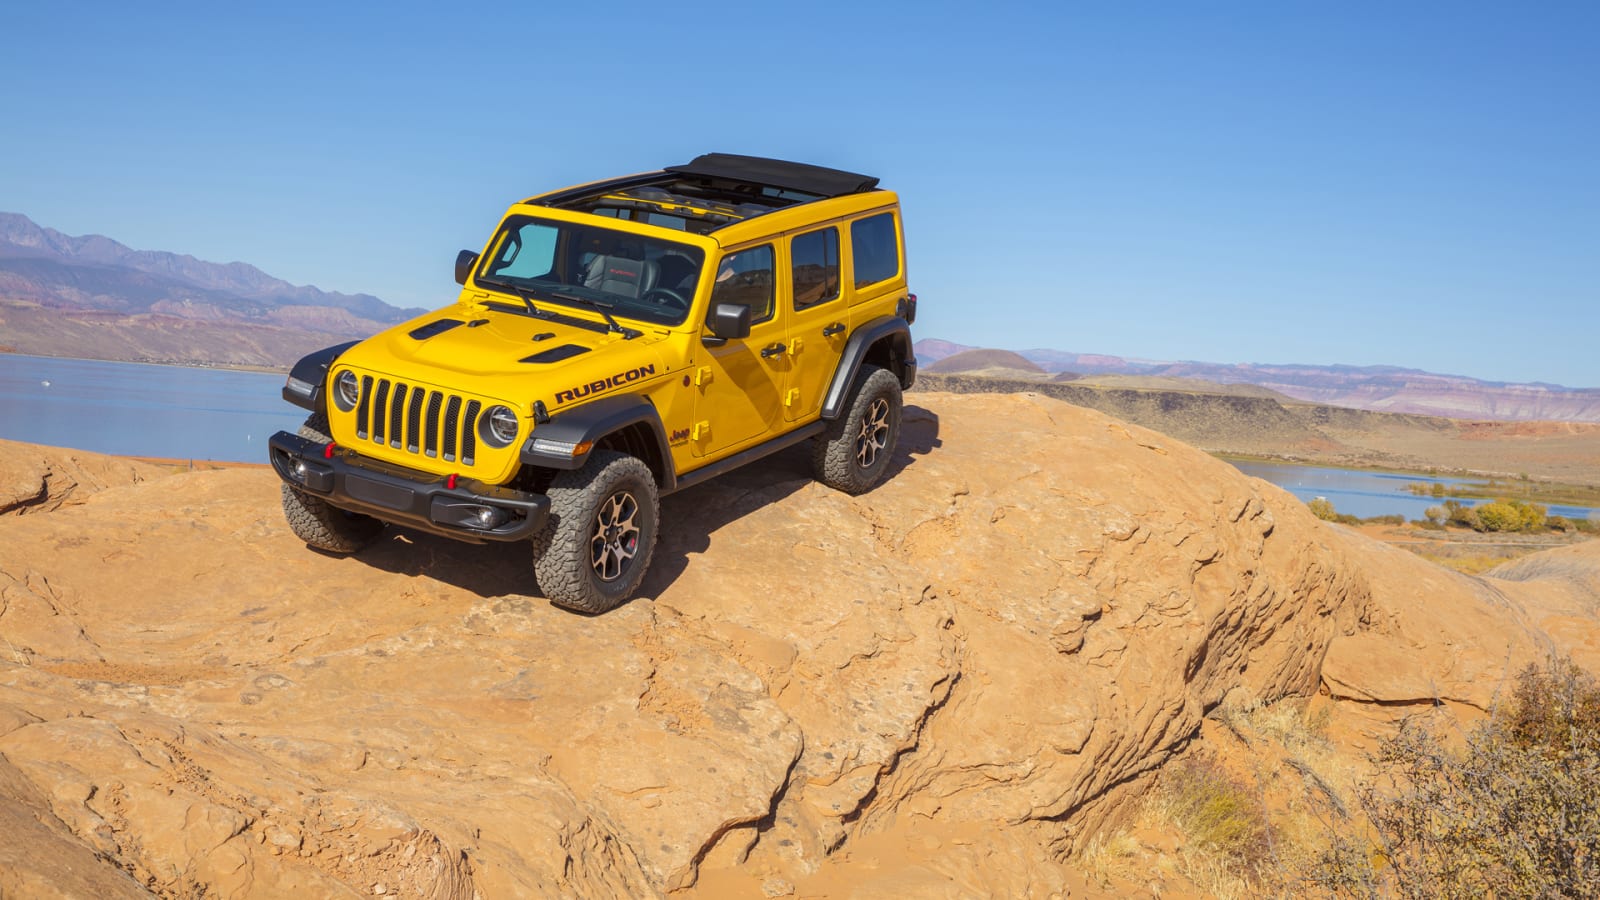 2020 Jeep Wrangler Unlimited EcoDiesel First Drive Review | Fuel economy,  range, off-roading - Autoblog